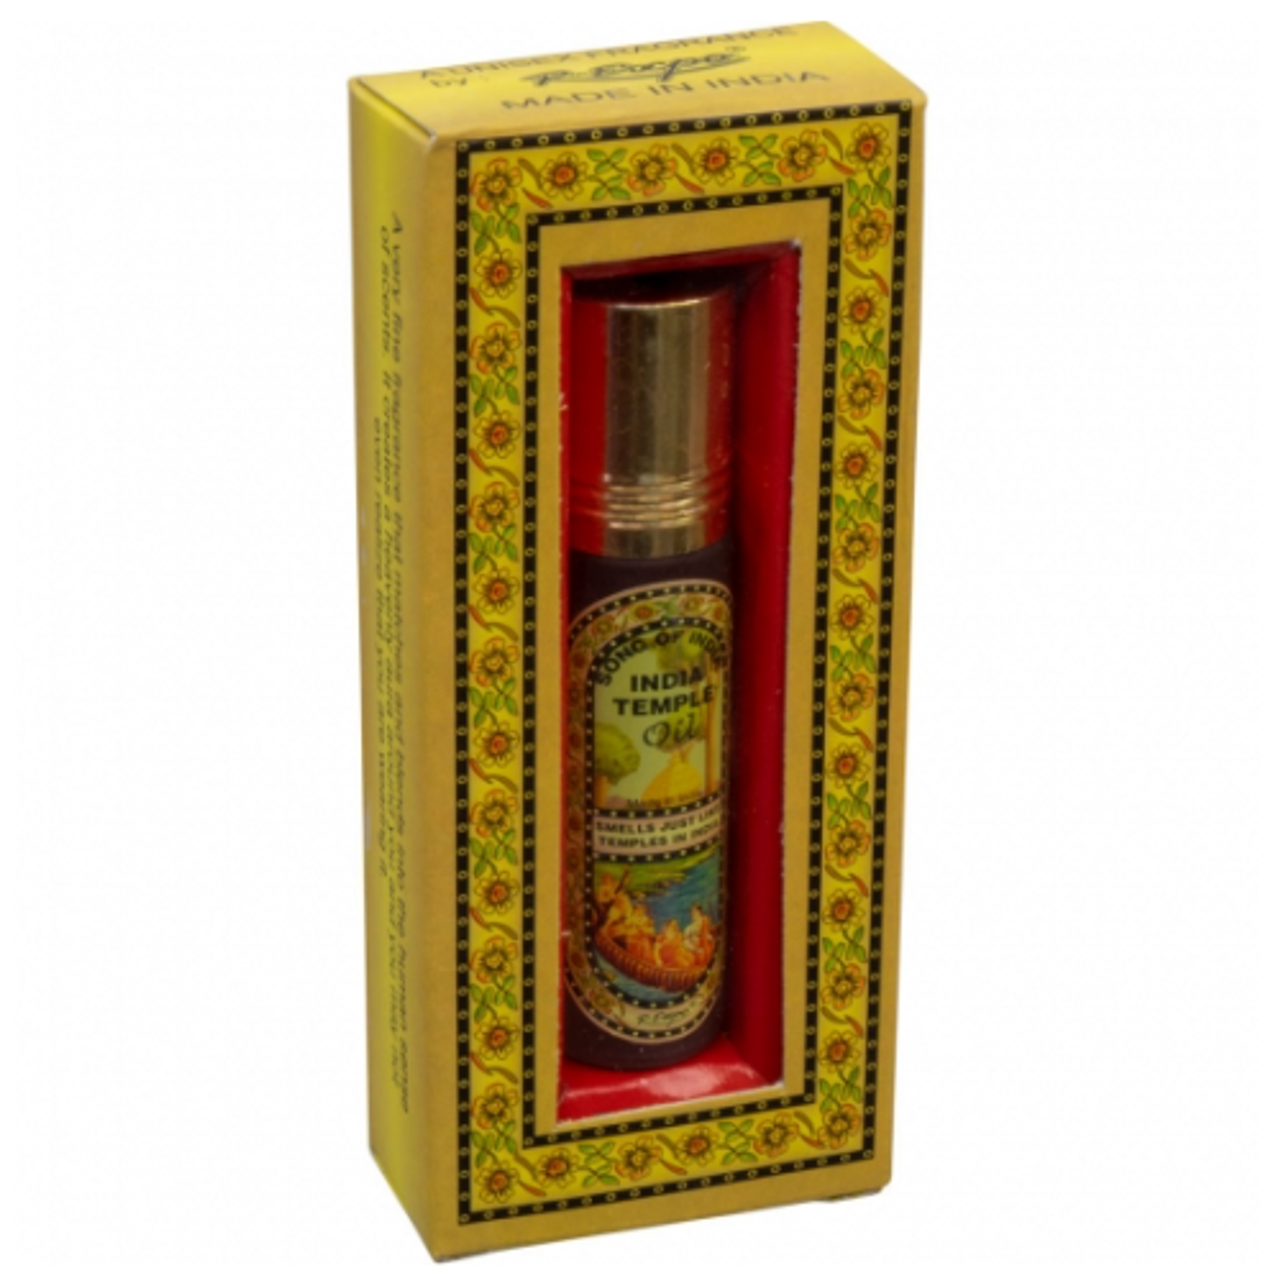 Perfume Oil by India Temple